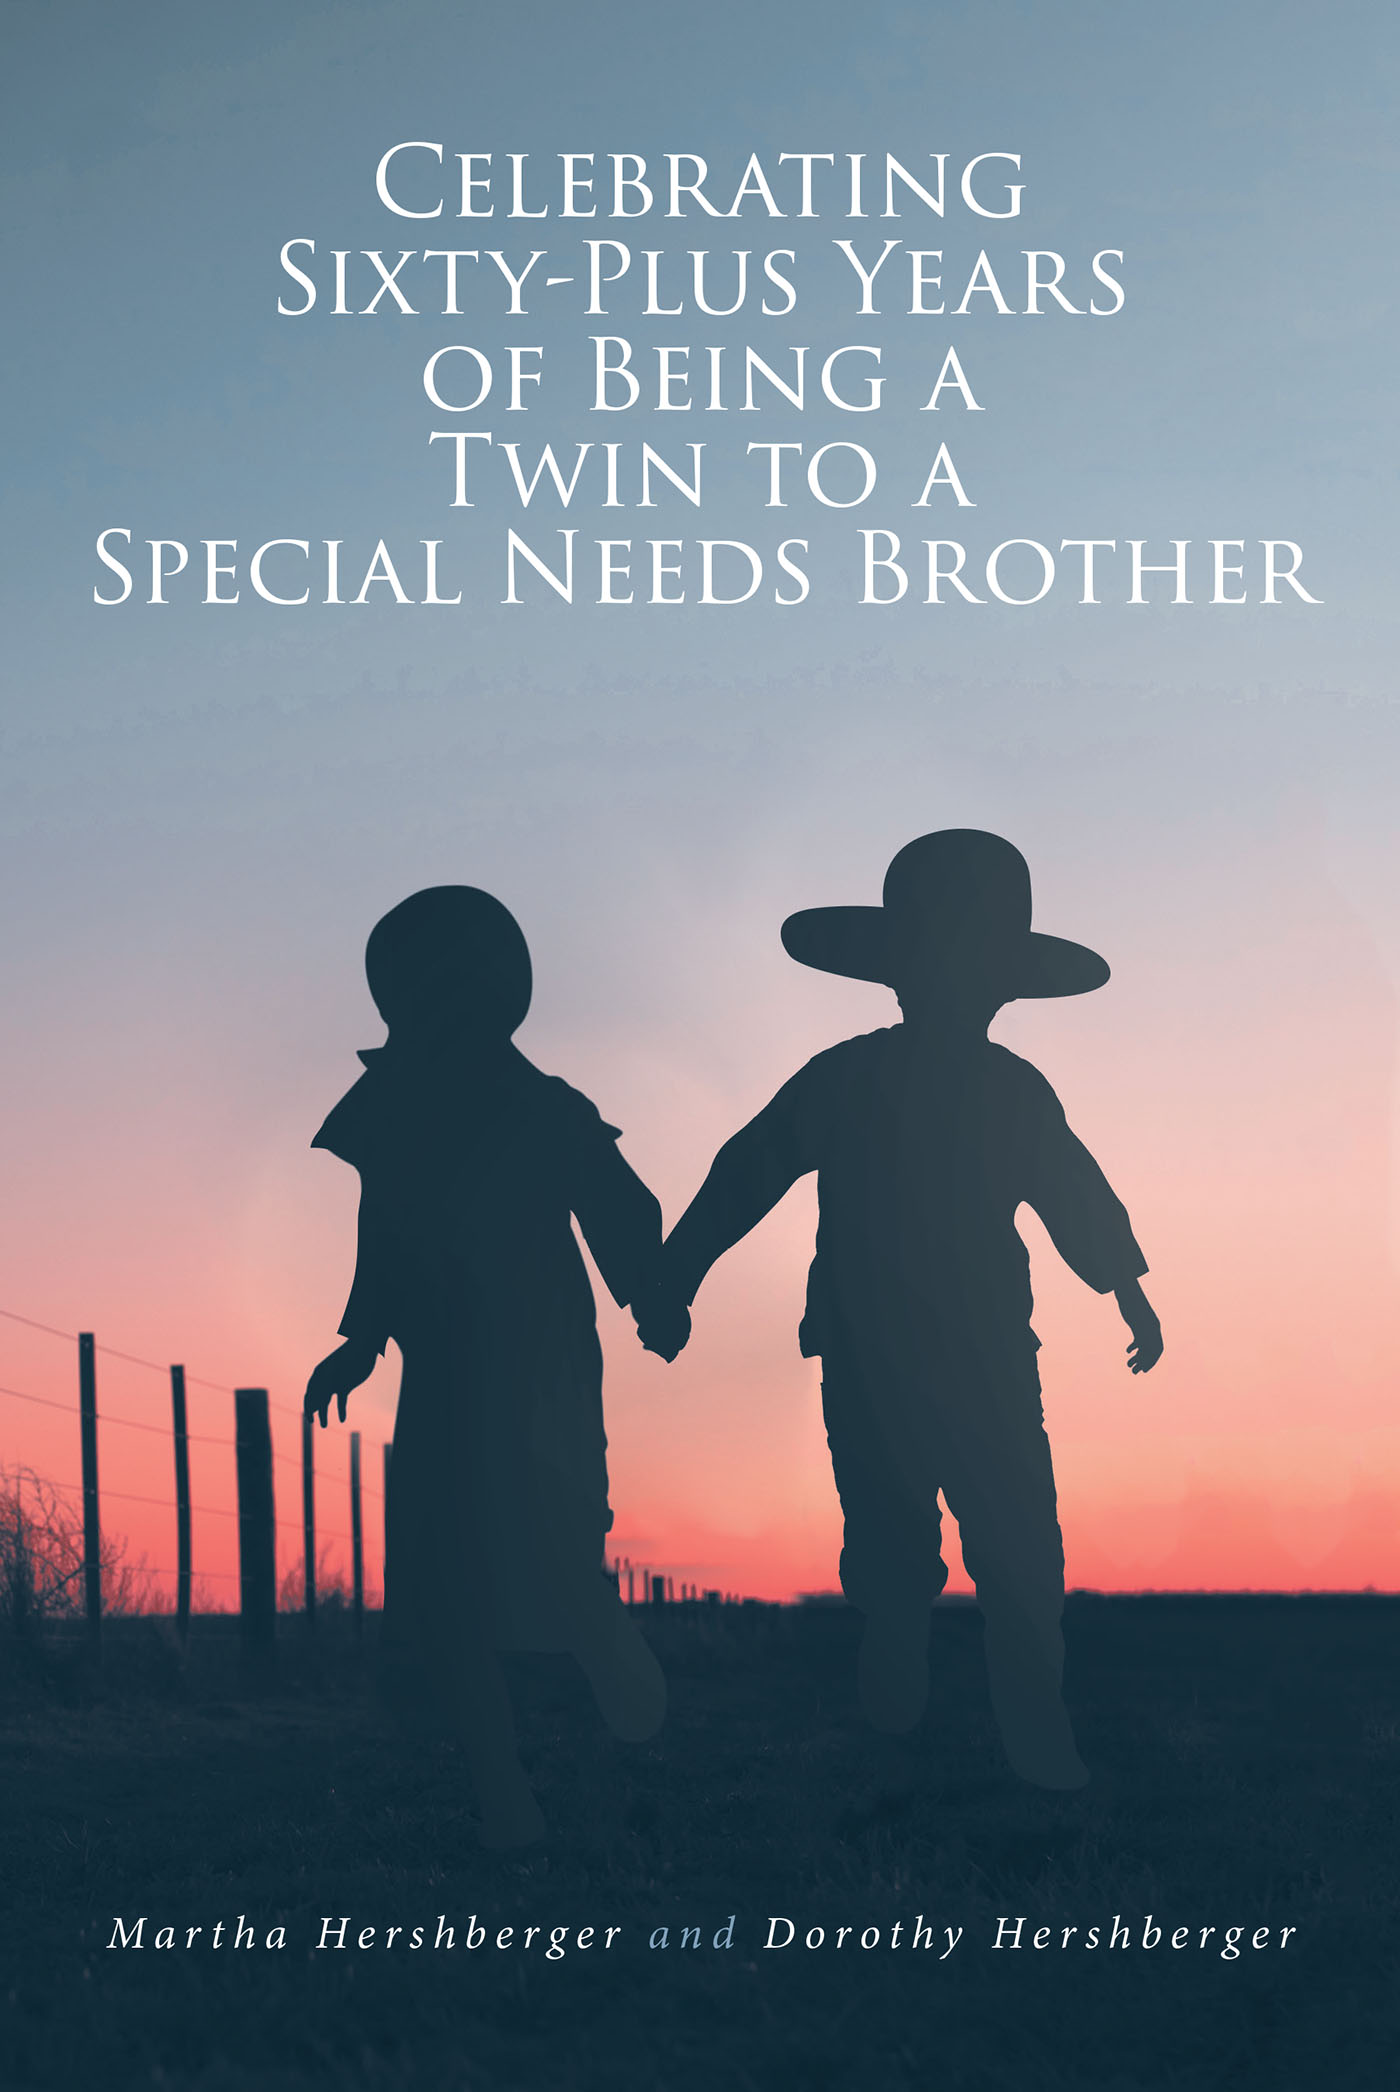 Martha Hershberger and Dorothy Hershberger’s Newly Released "Celebrating Sixty-Plus Years of Being a Twin to a Special Needs Brother" is a Touching Memoir